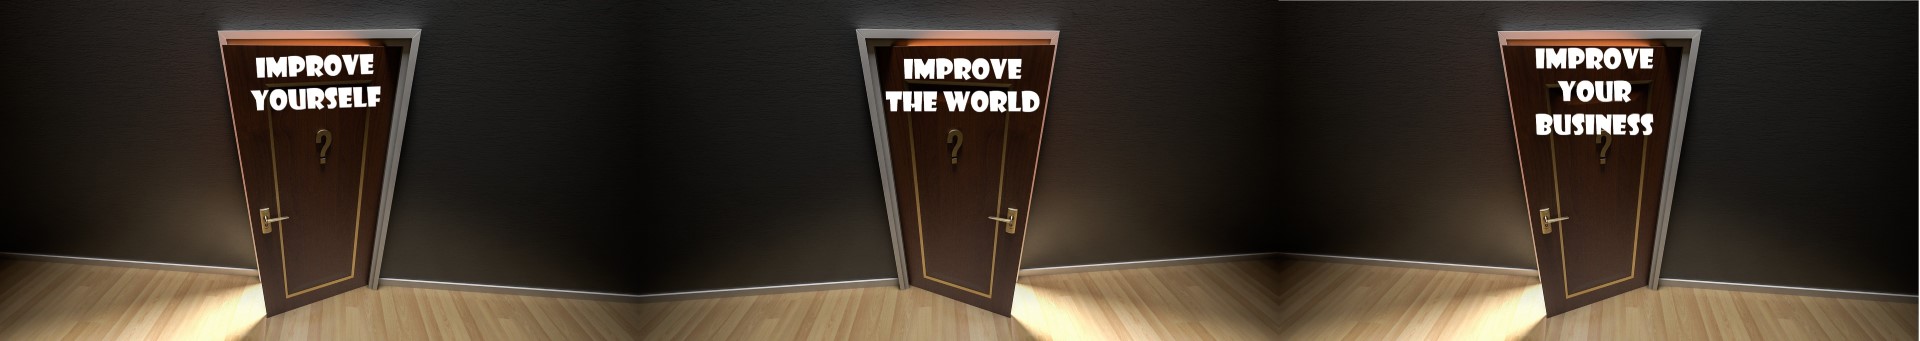 improve yourself, improve your business, improve the world